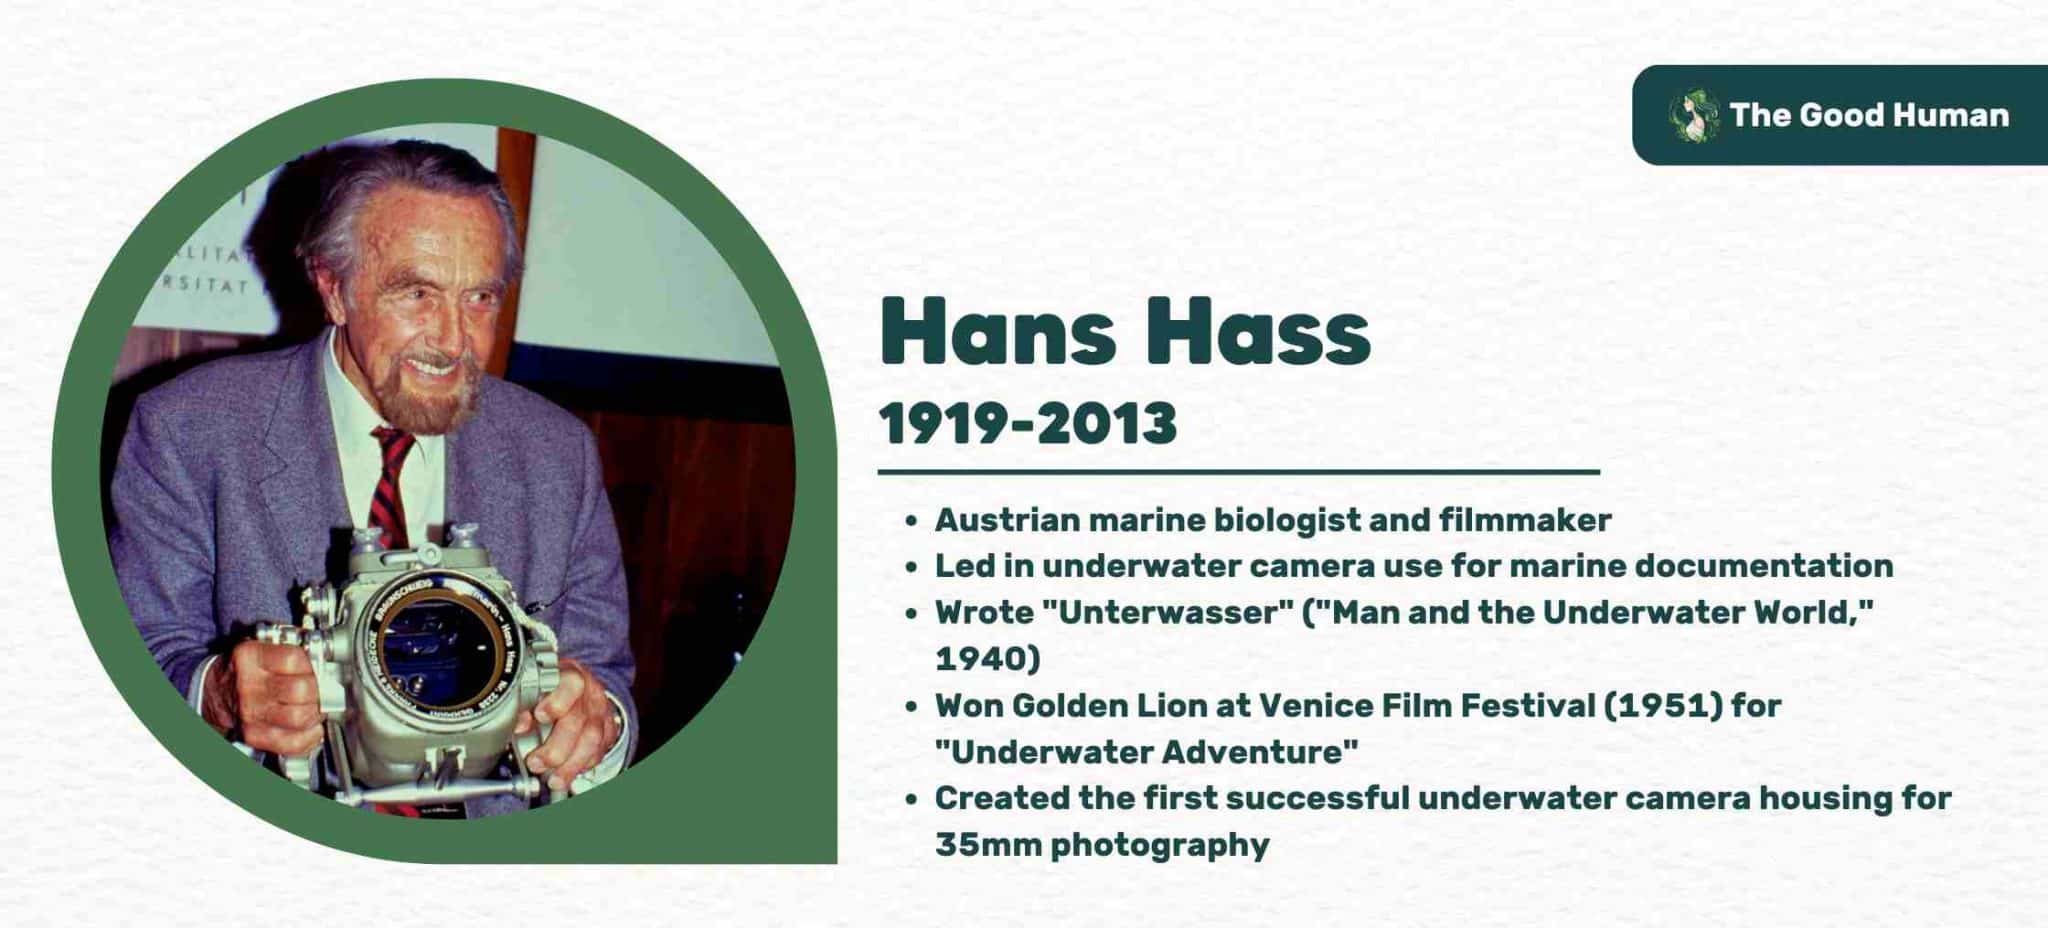 About Hans Hass